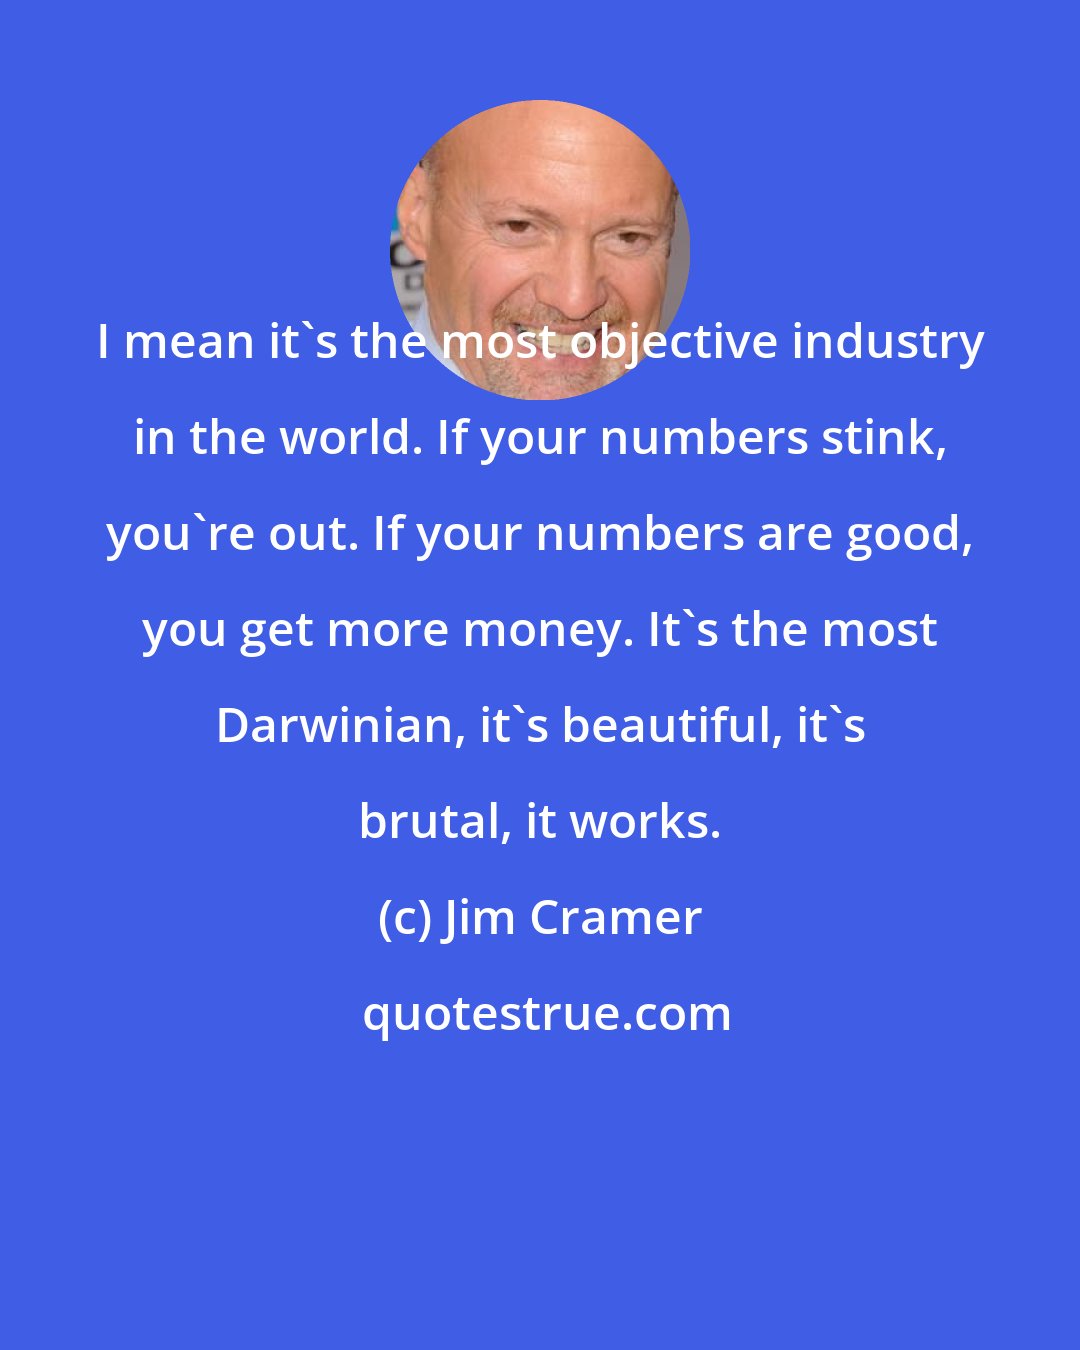 Jim Cramer: I mean it's the most objective industry in the world. If your numbers stink, you're out. If your numbers are good, you get more money. It's the most Darwinian, it's beautiful, it's brutal, it works.